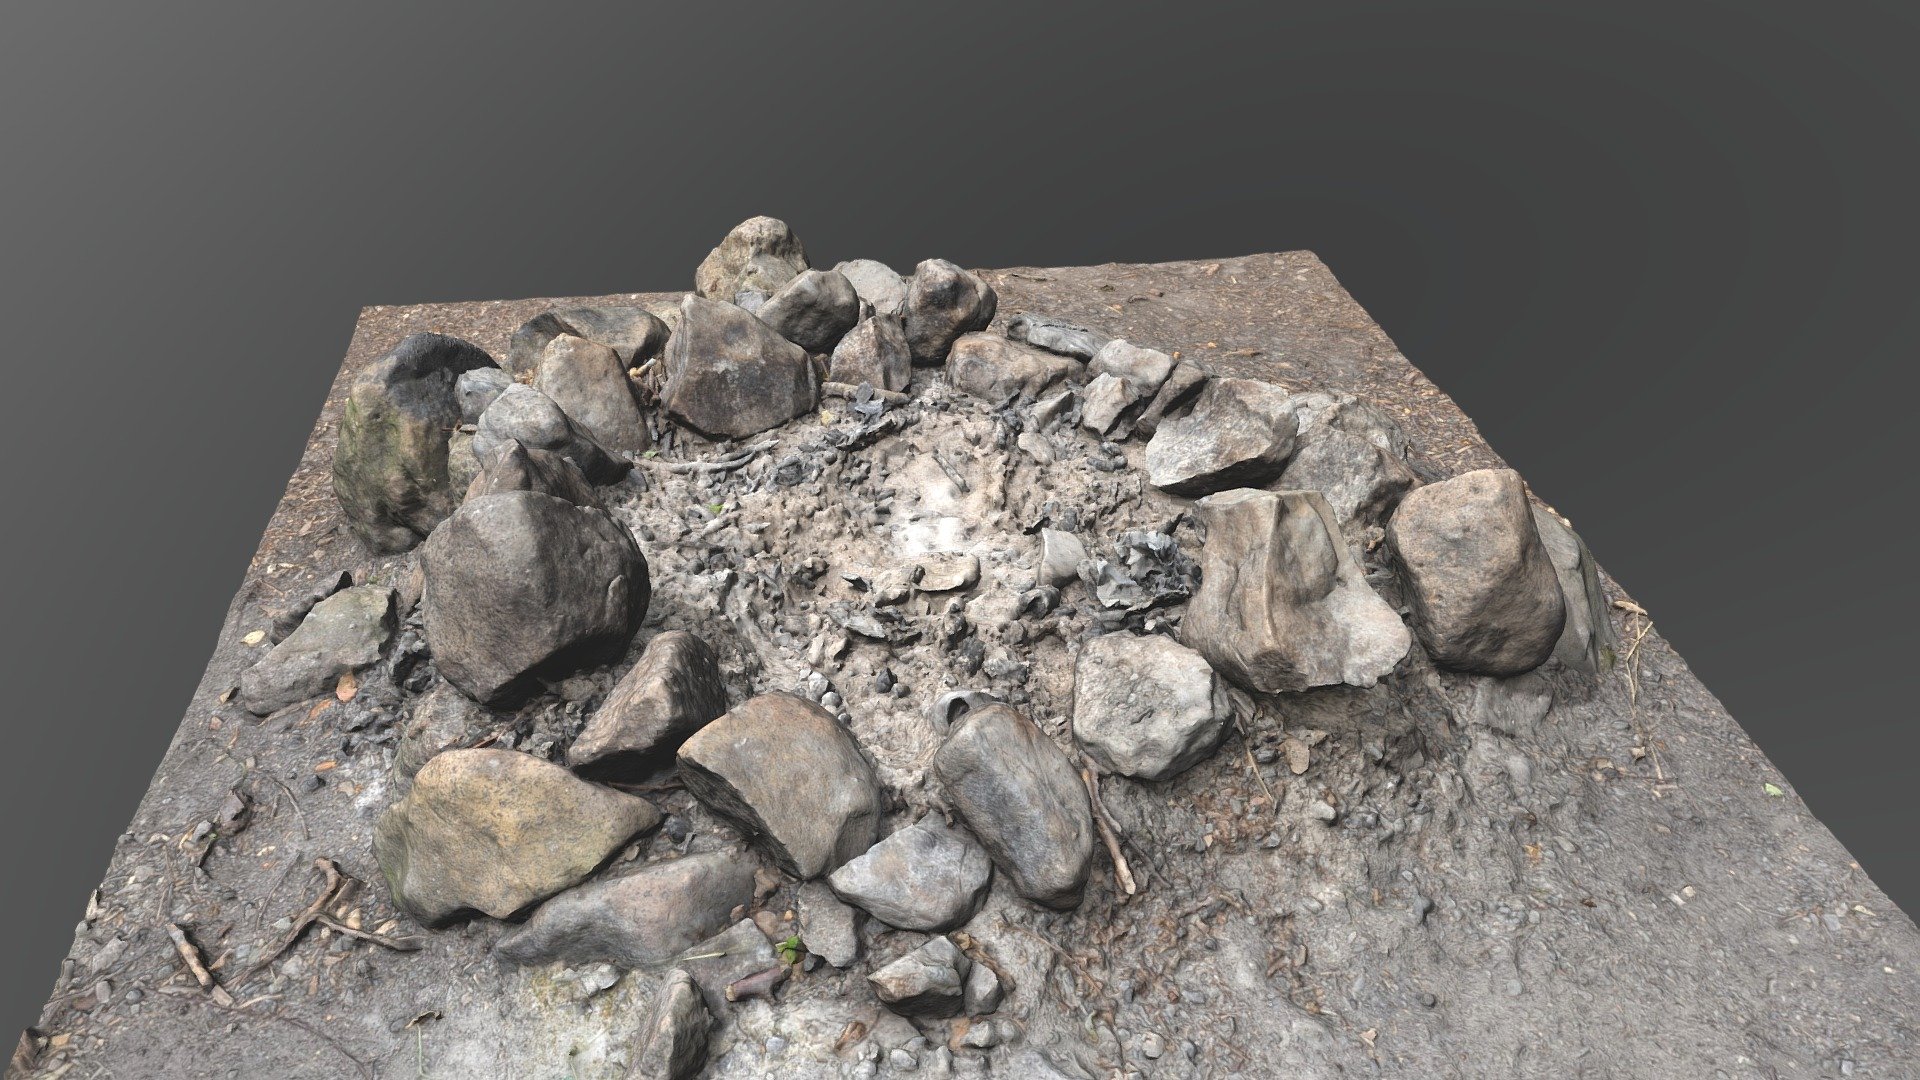 Fireplace fire pit hole in meadow forest, campfire natural made of stones
+ Reality capture - Fireplace fire pit hole campfire made of stones - Buy Royalty Free 3D model by matousekfoto 3d model